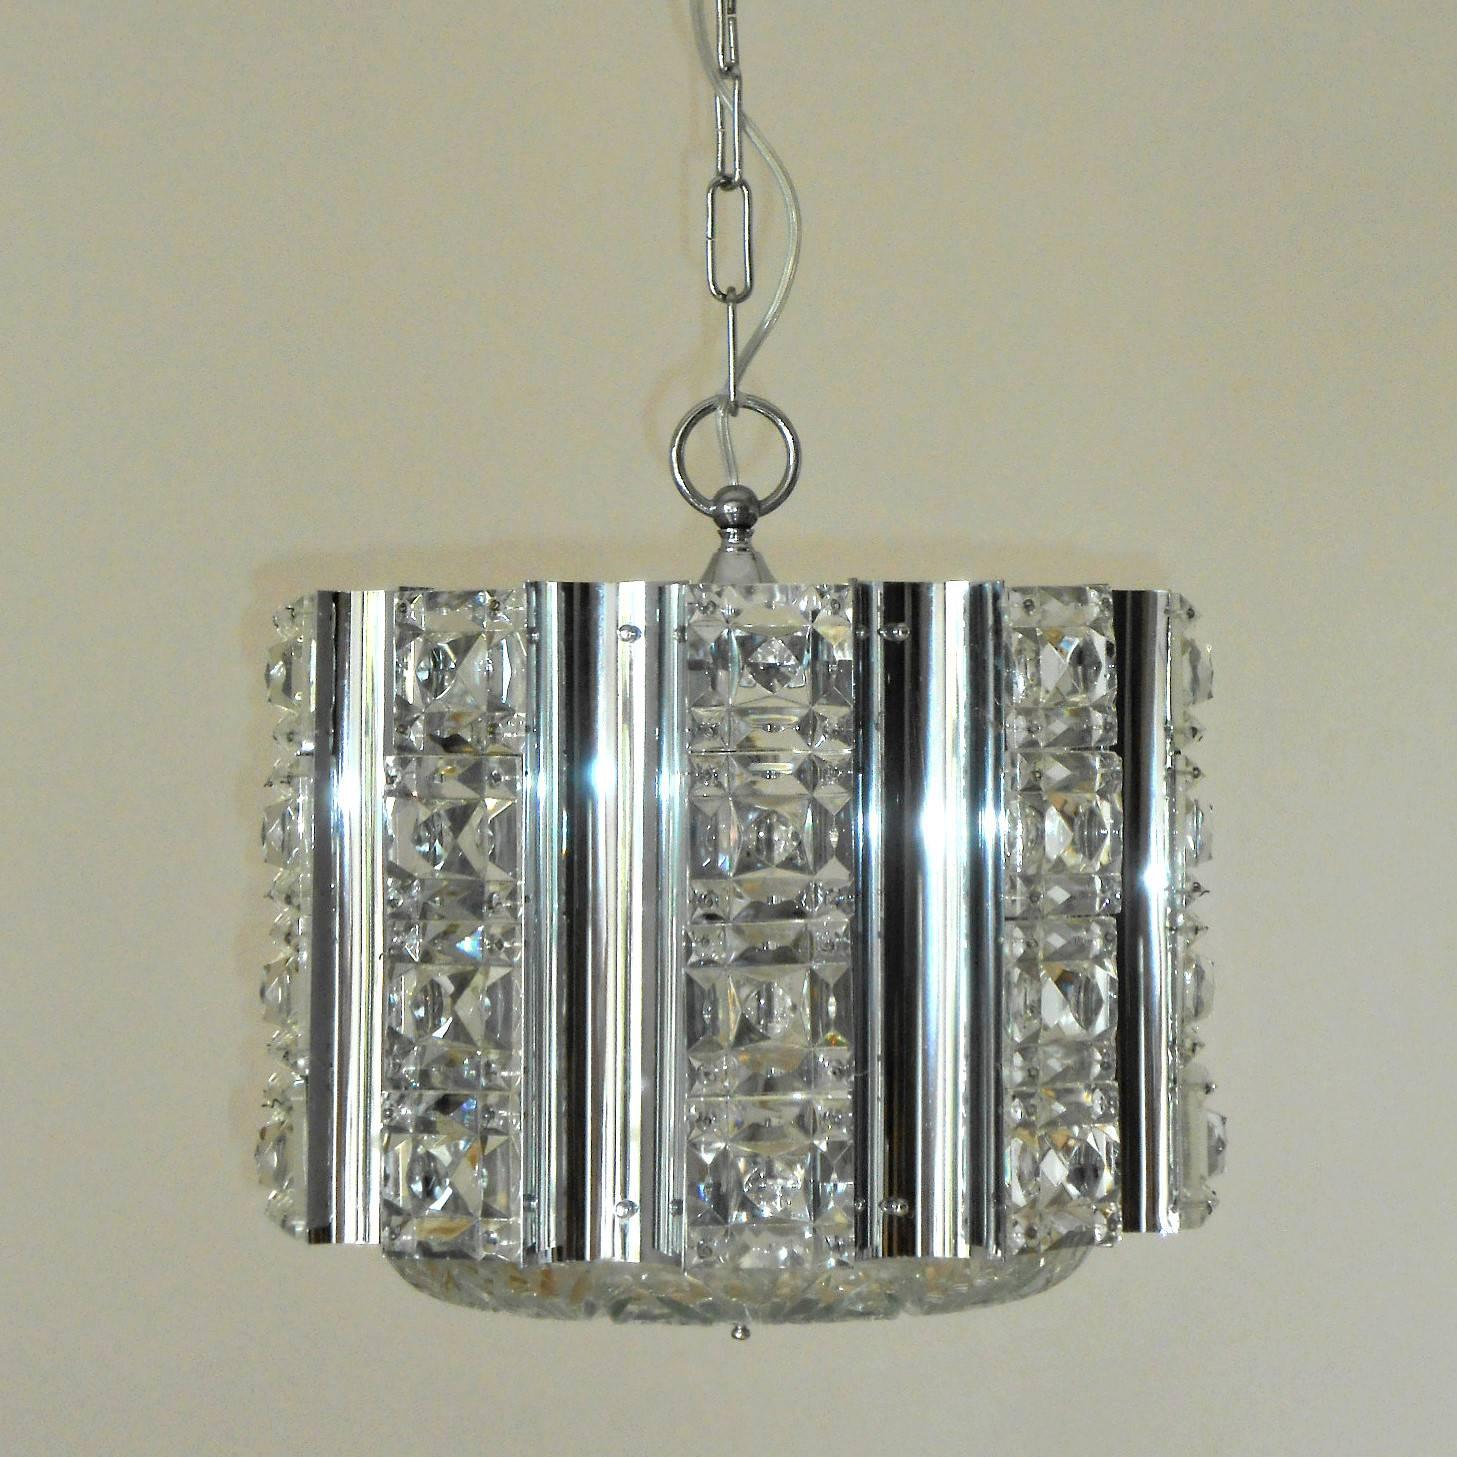 Vintage Italian pendant with faceted crystals mounted on nine sides on chrome frame and faceted crystal diffuser / Made in Italy circa 1960’s
3 lights / E26 or E27 type / max 60W each
Diameter: 14.5 inches / Height: 14 inches plus chain and canopy